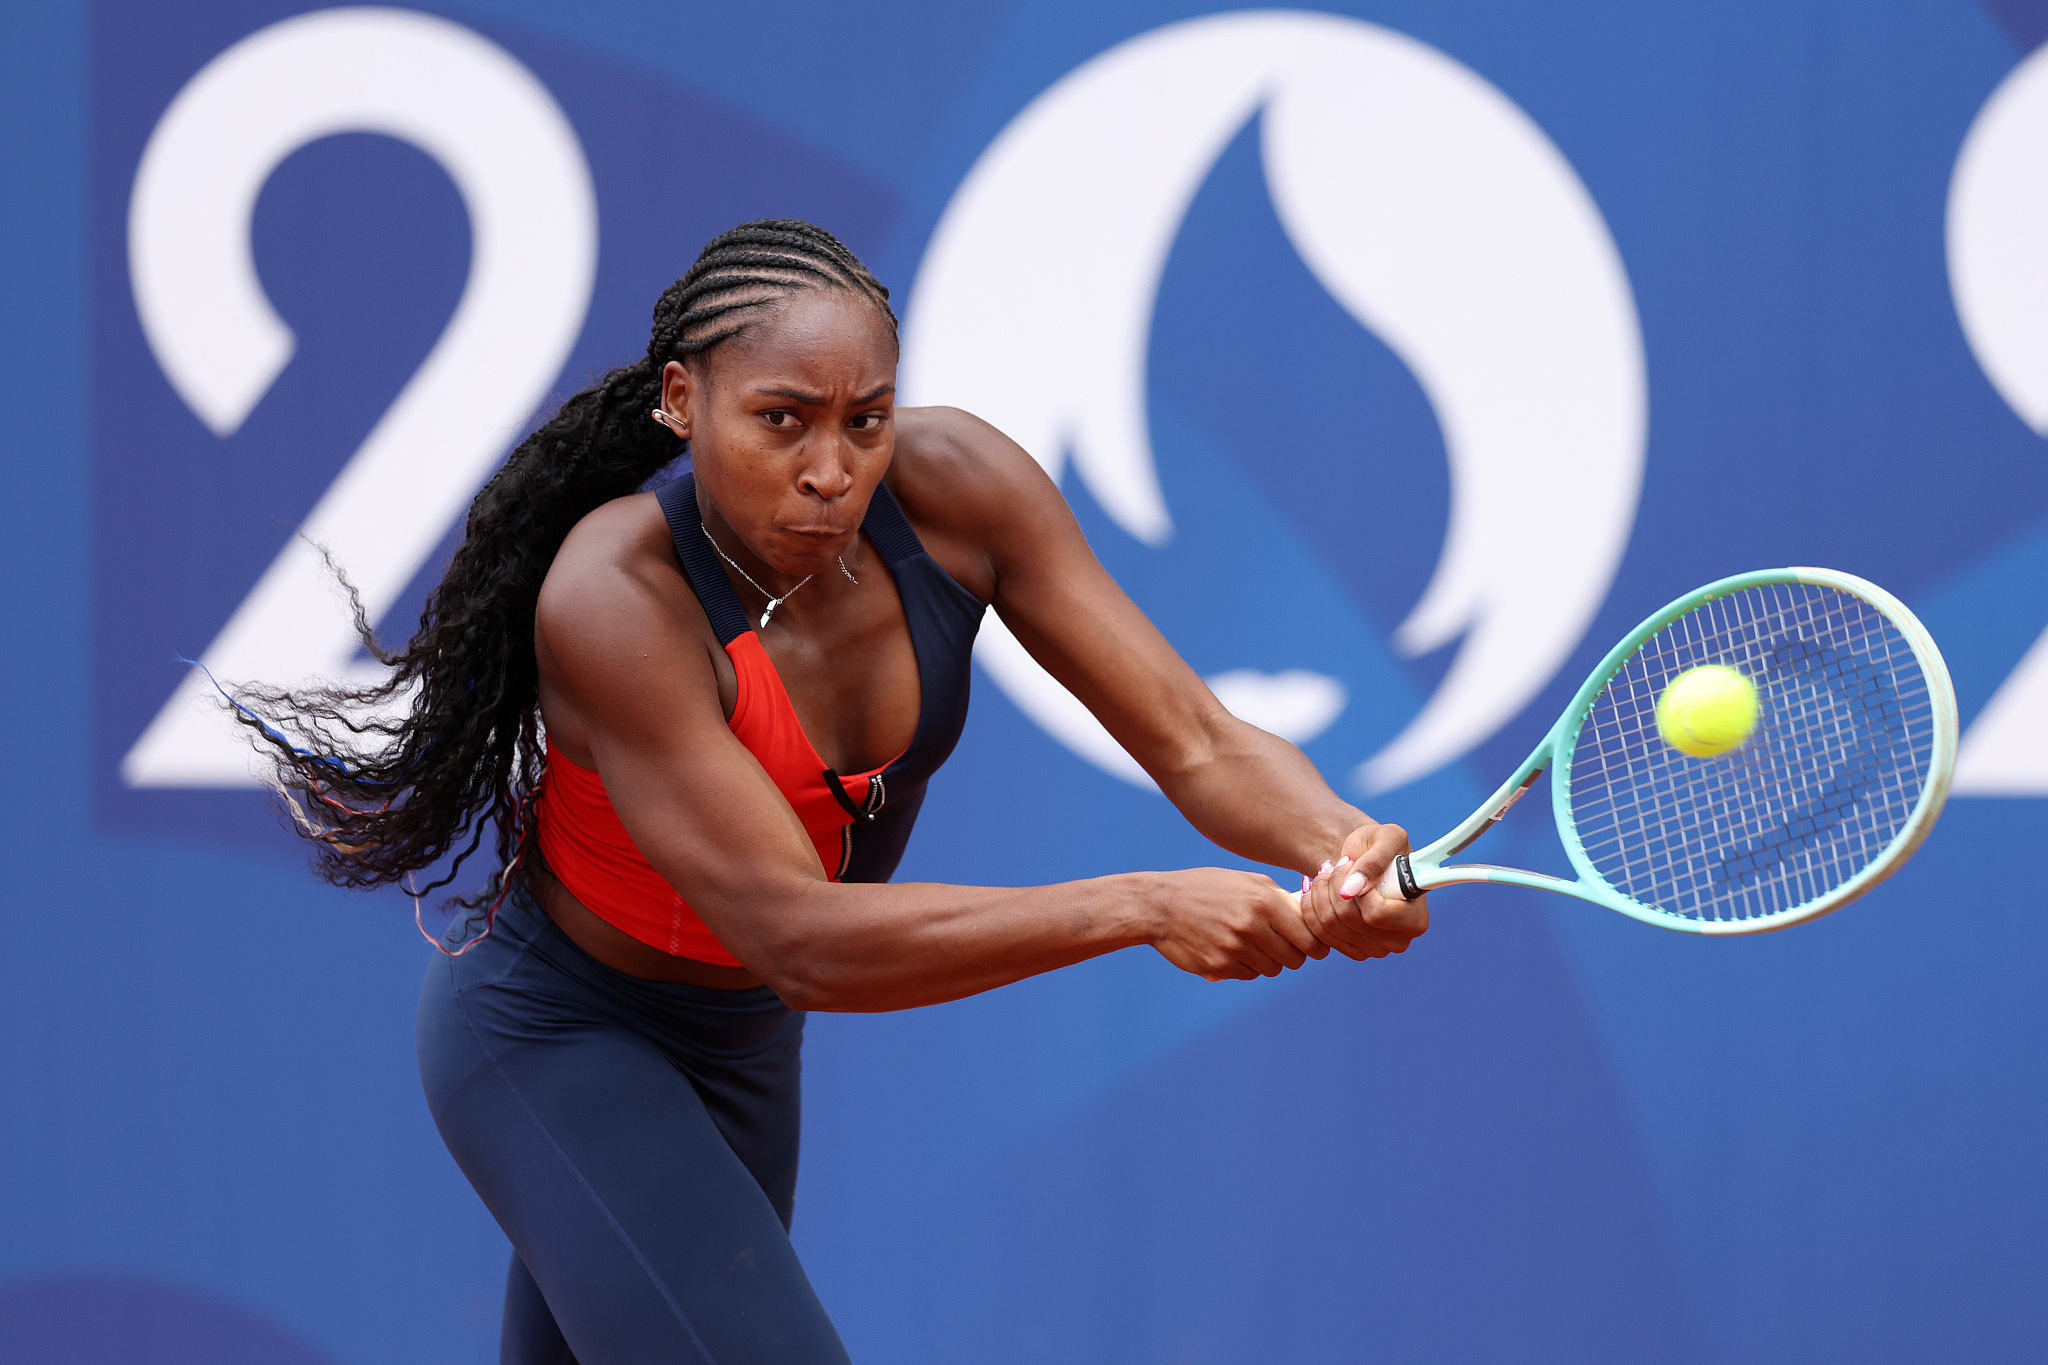 Coco Gauff of the USA hits a shot in practice ahead of the 2024 Summer Olympics in Paris, July 24, 2024. /CFP